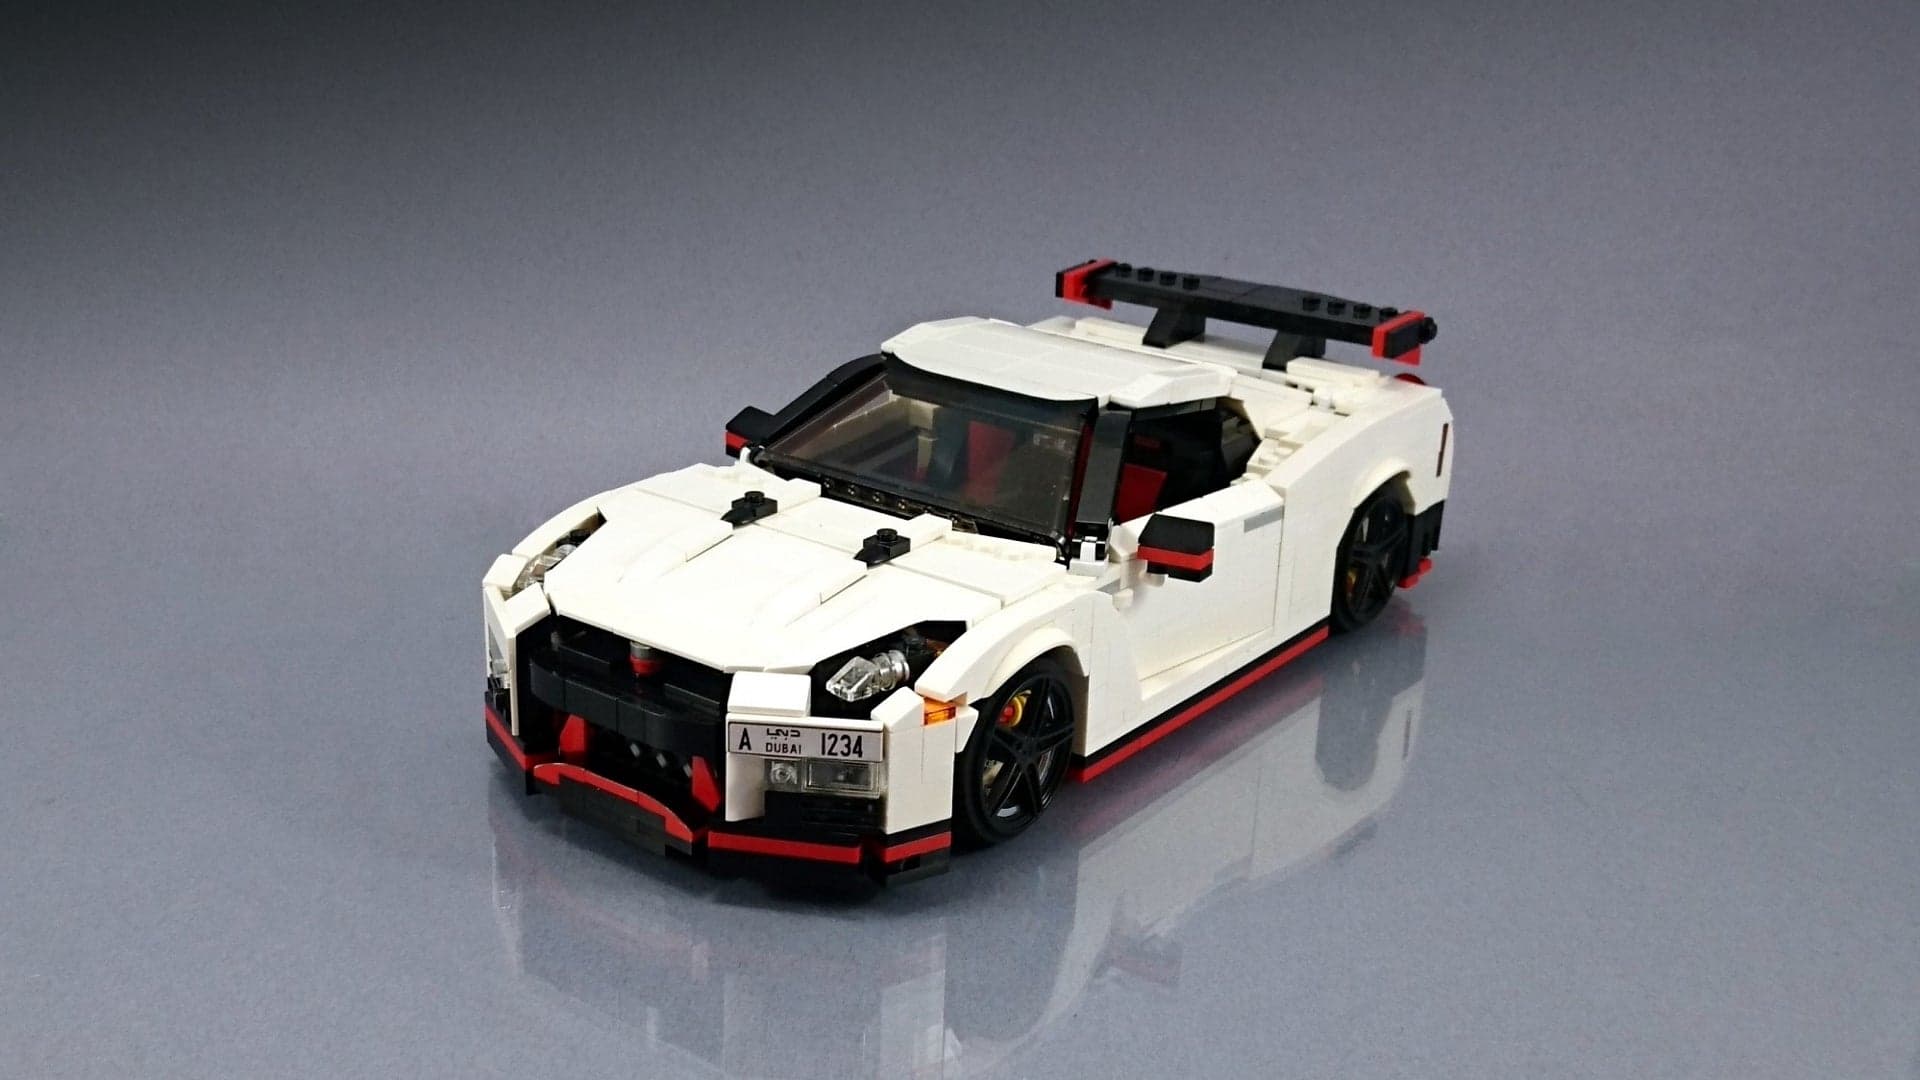 Lego Master Firas Abu-Jaber Builds Incredible Nissan GT-R Nismo Model